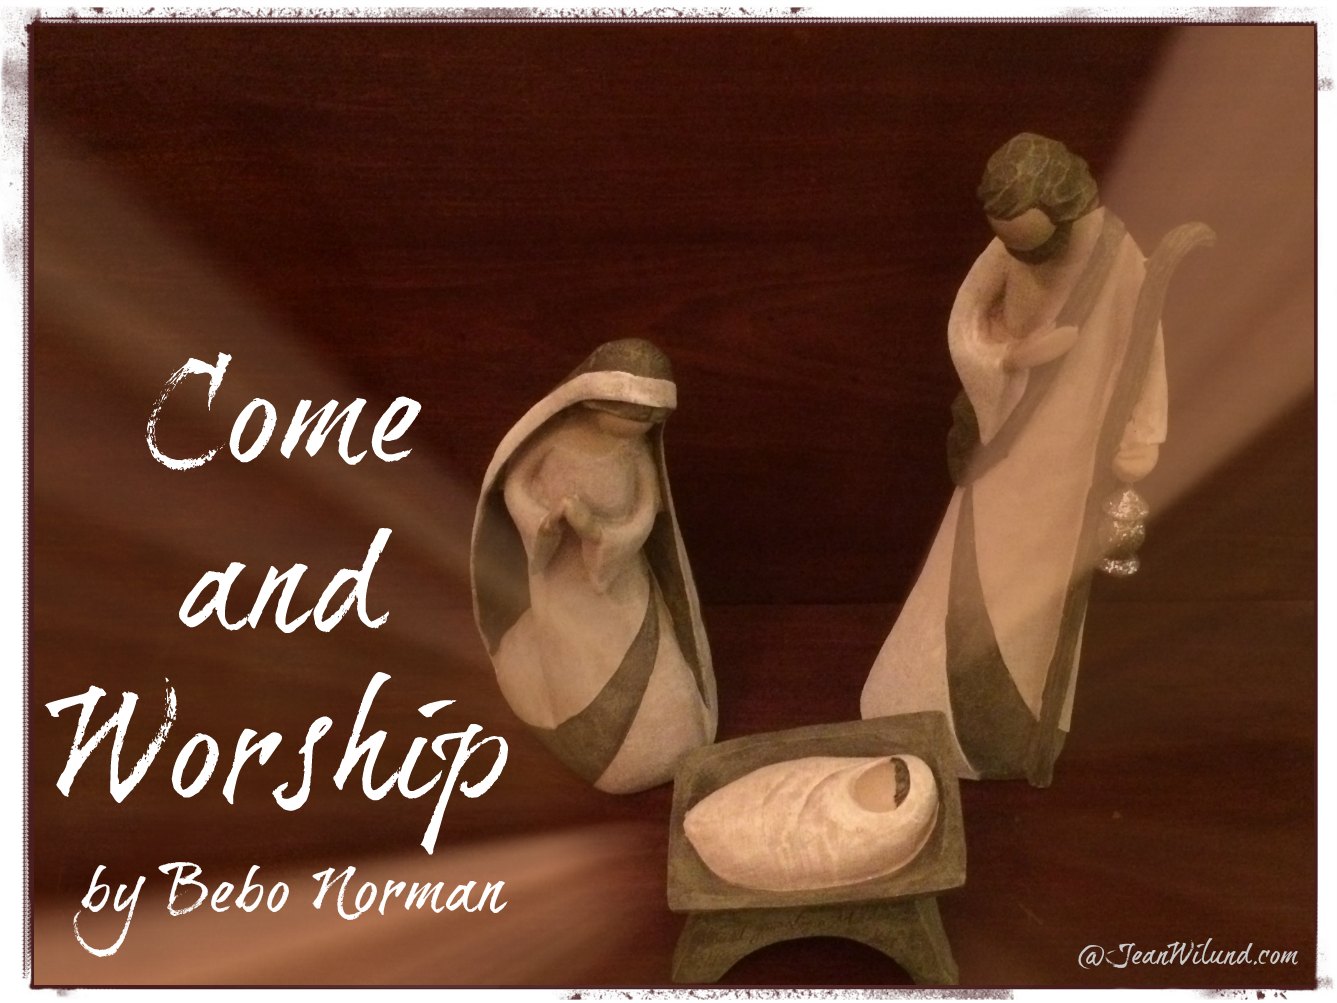 Click to view music video Come & Worship by Bebo Norman via www.JeanWilund.com